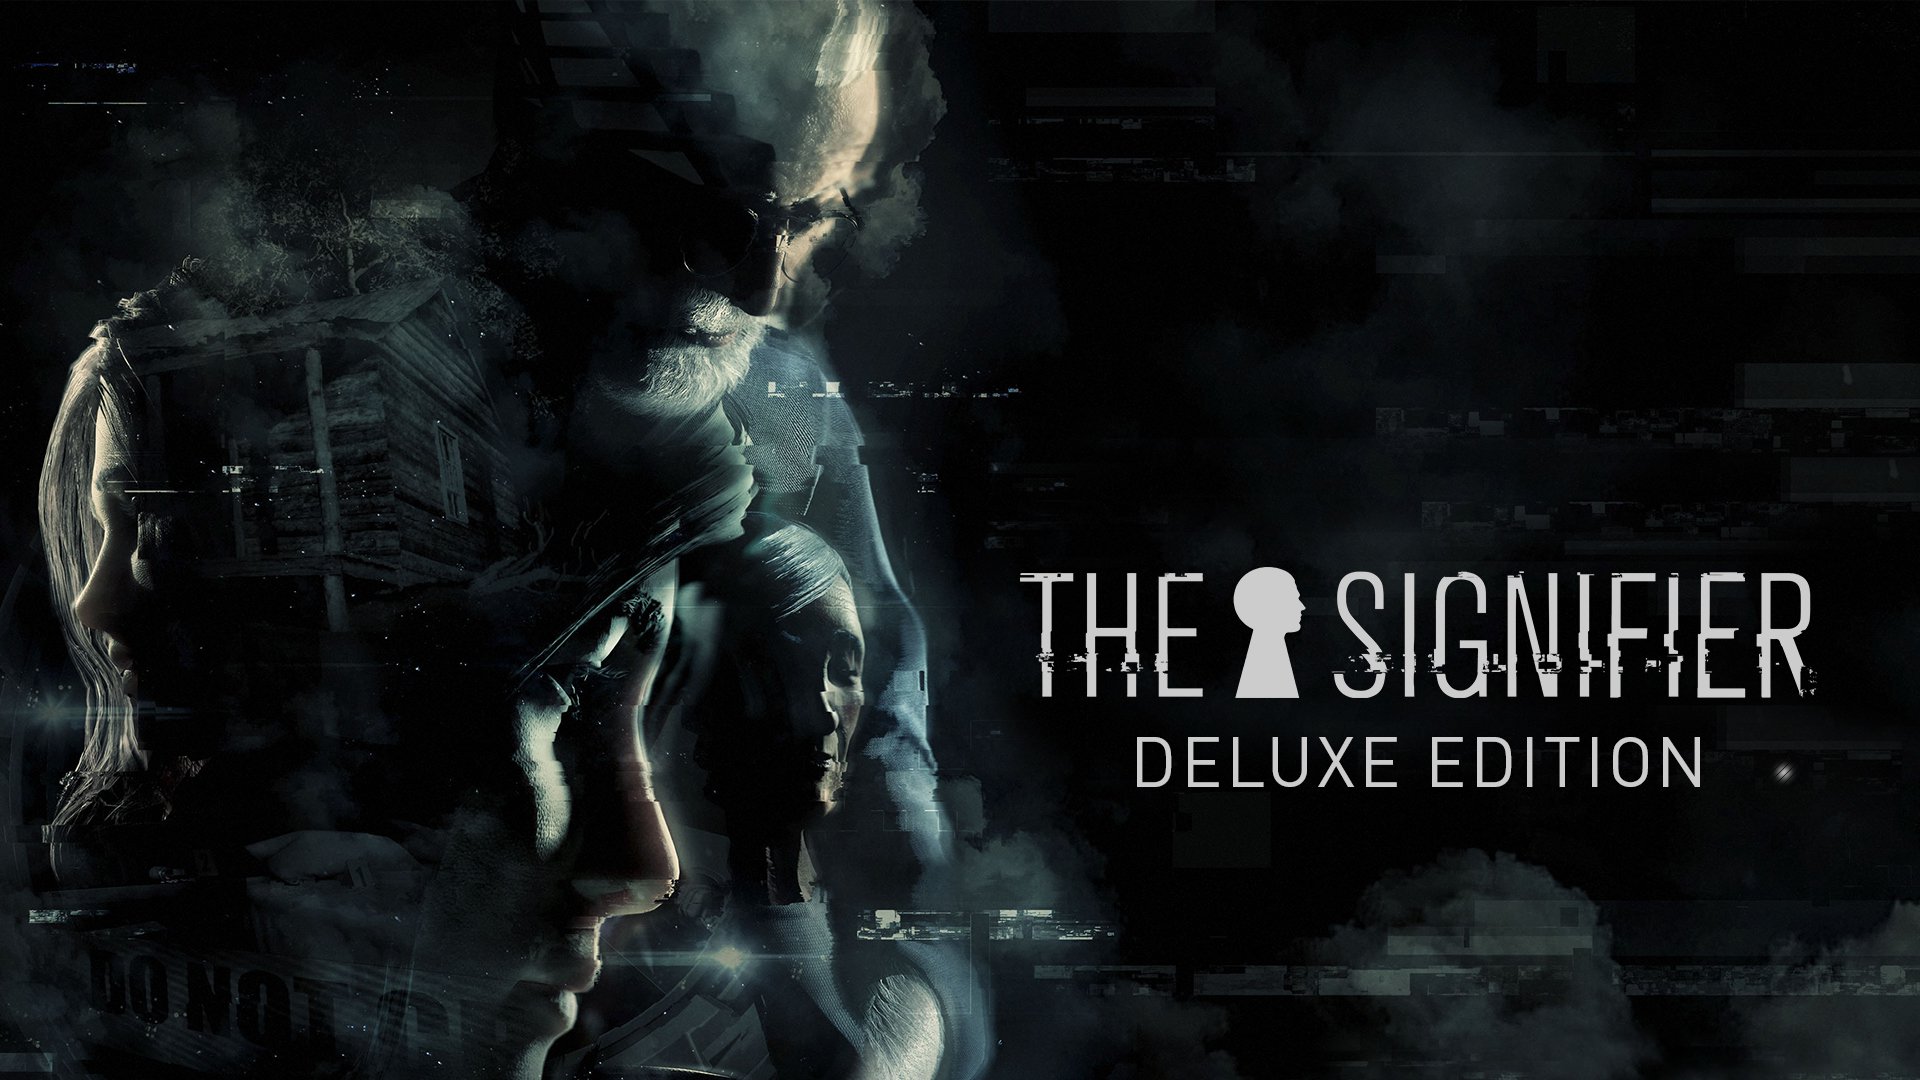 The Signifier Deluxe Edition 28